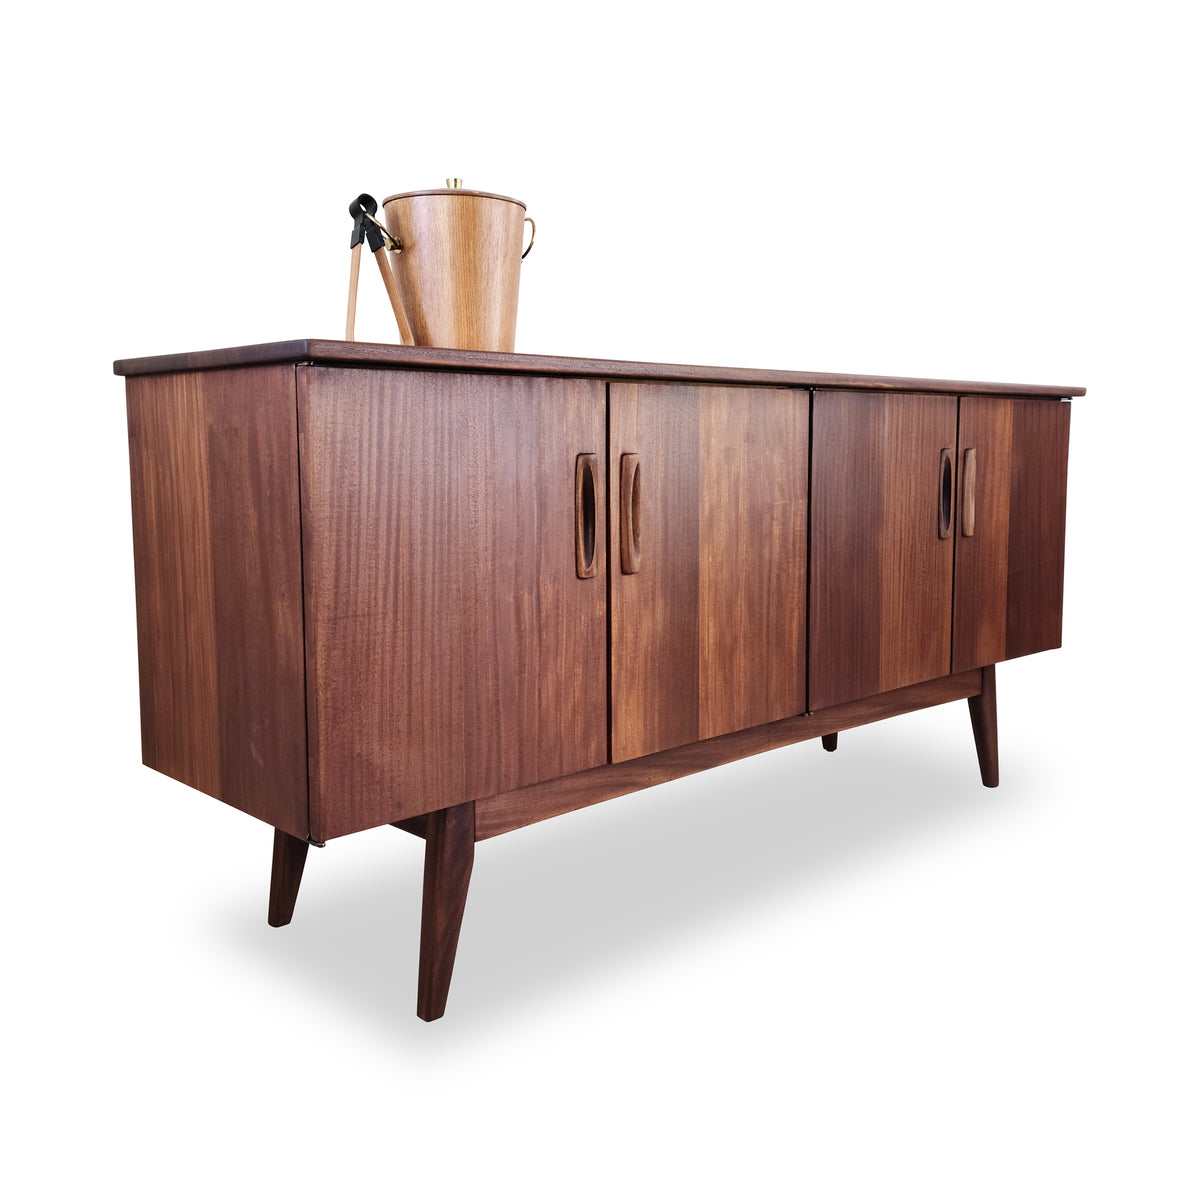 Teak Sideboard by Jan Kuypers for Imperial